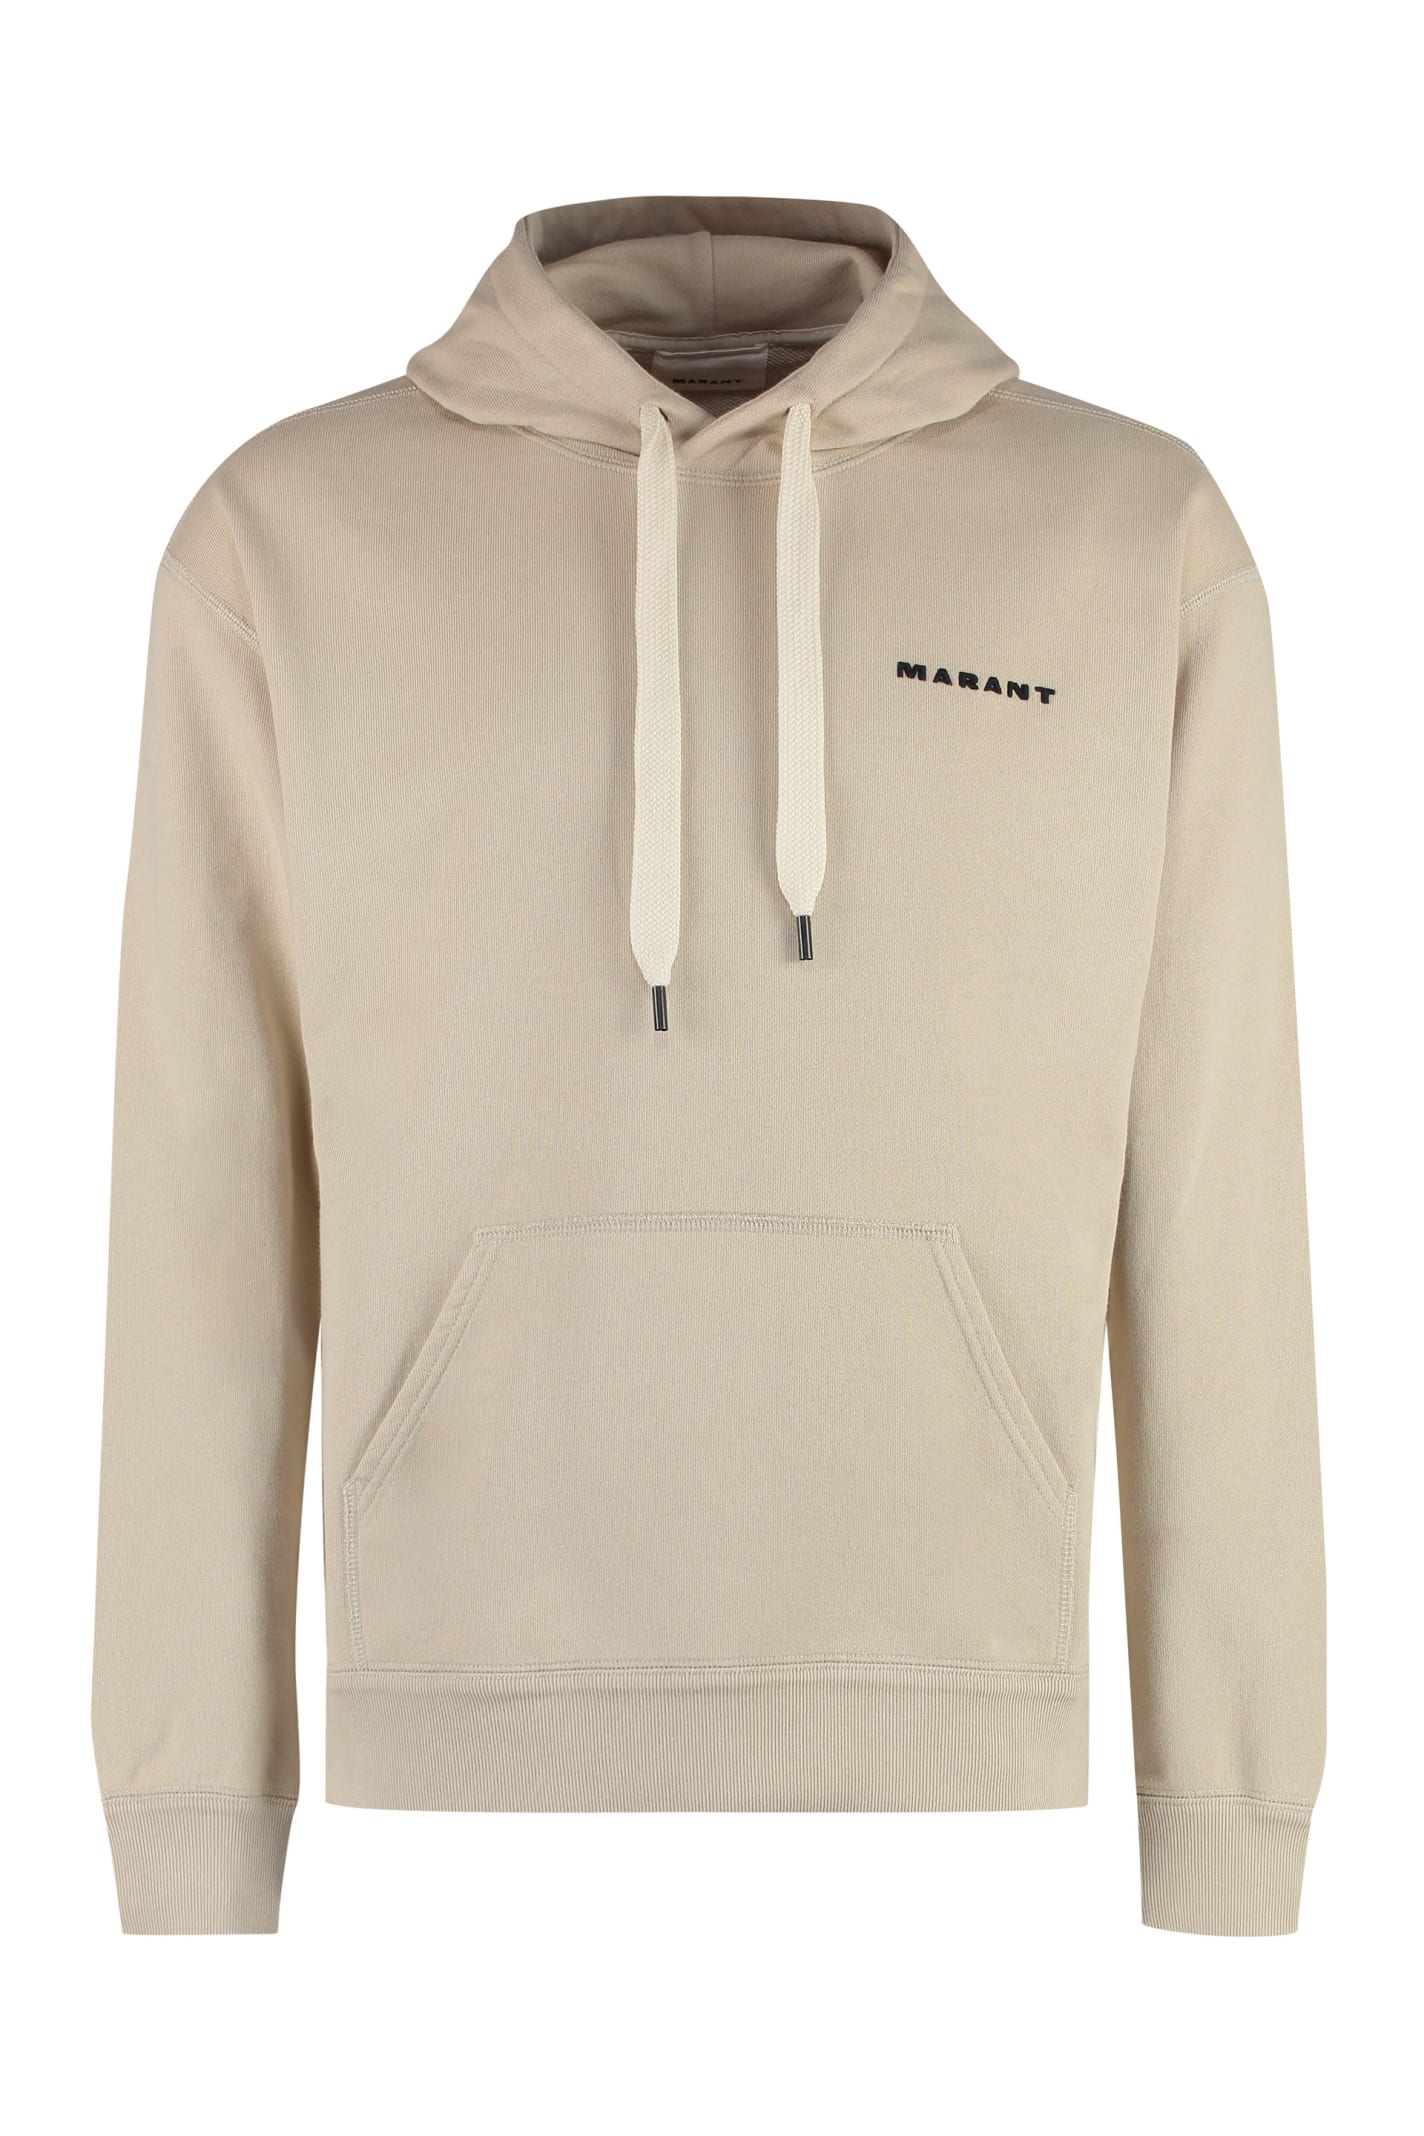 ISABEL MARANT MARCELLO HOODIE